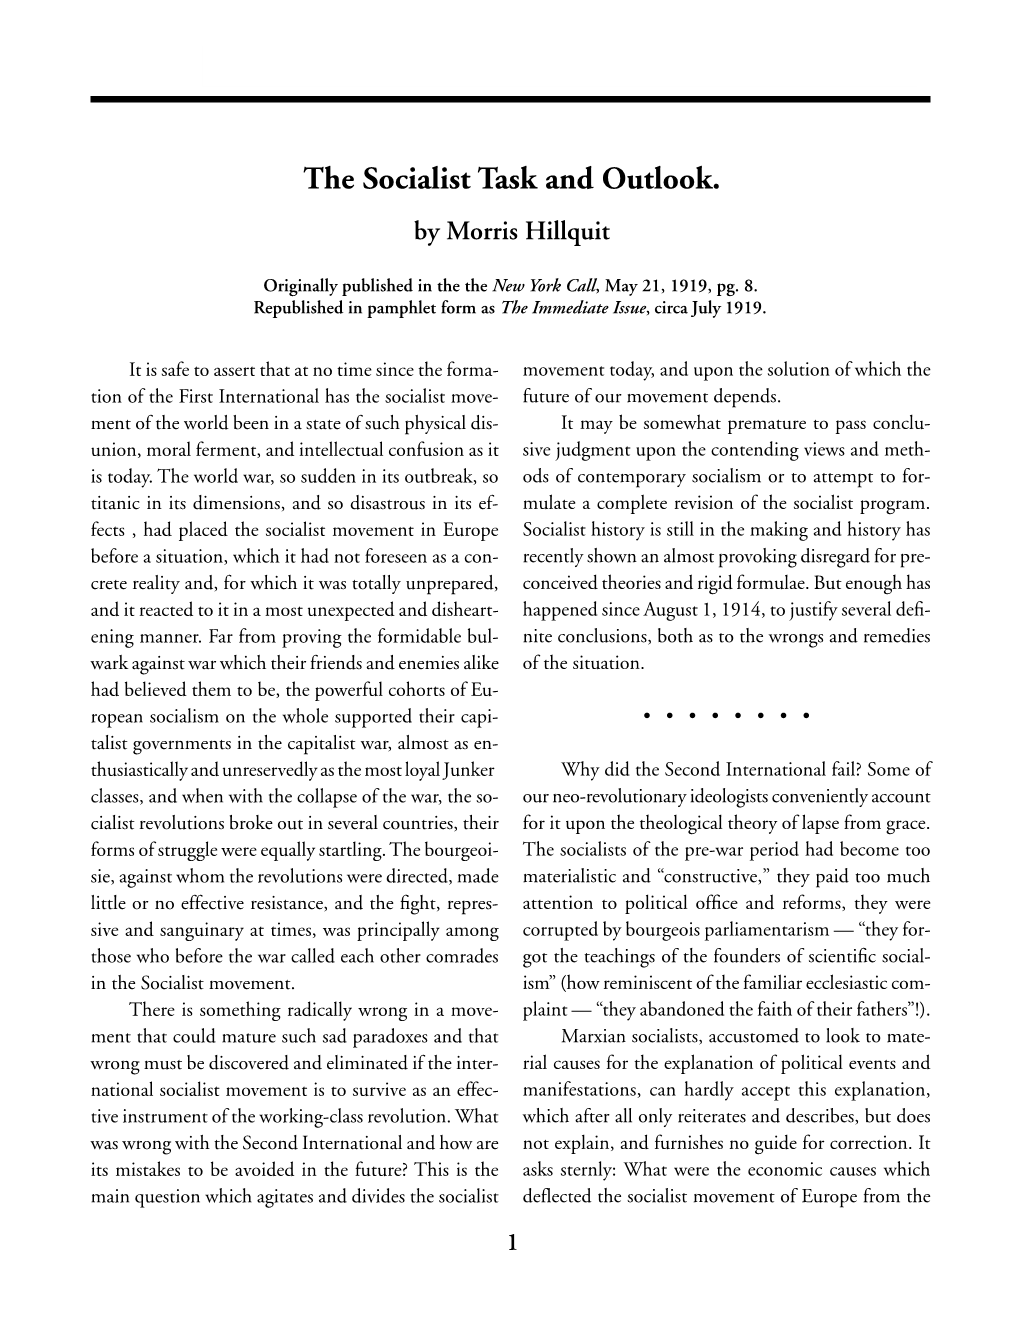 The Socialist Task and Outlook. by Morris Hillquit